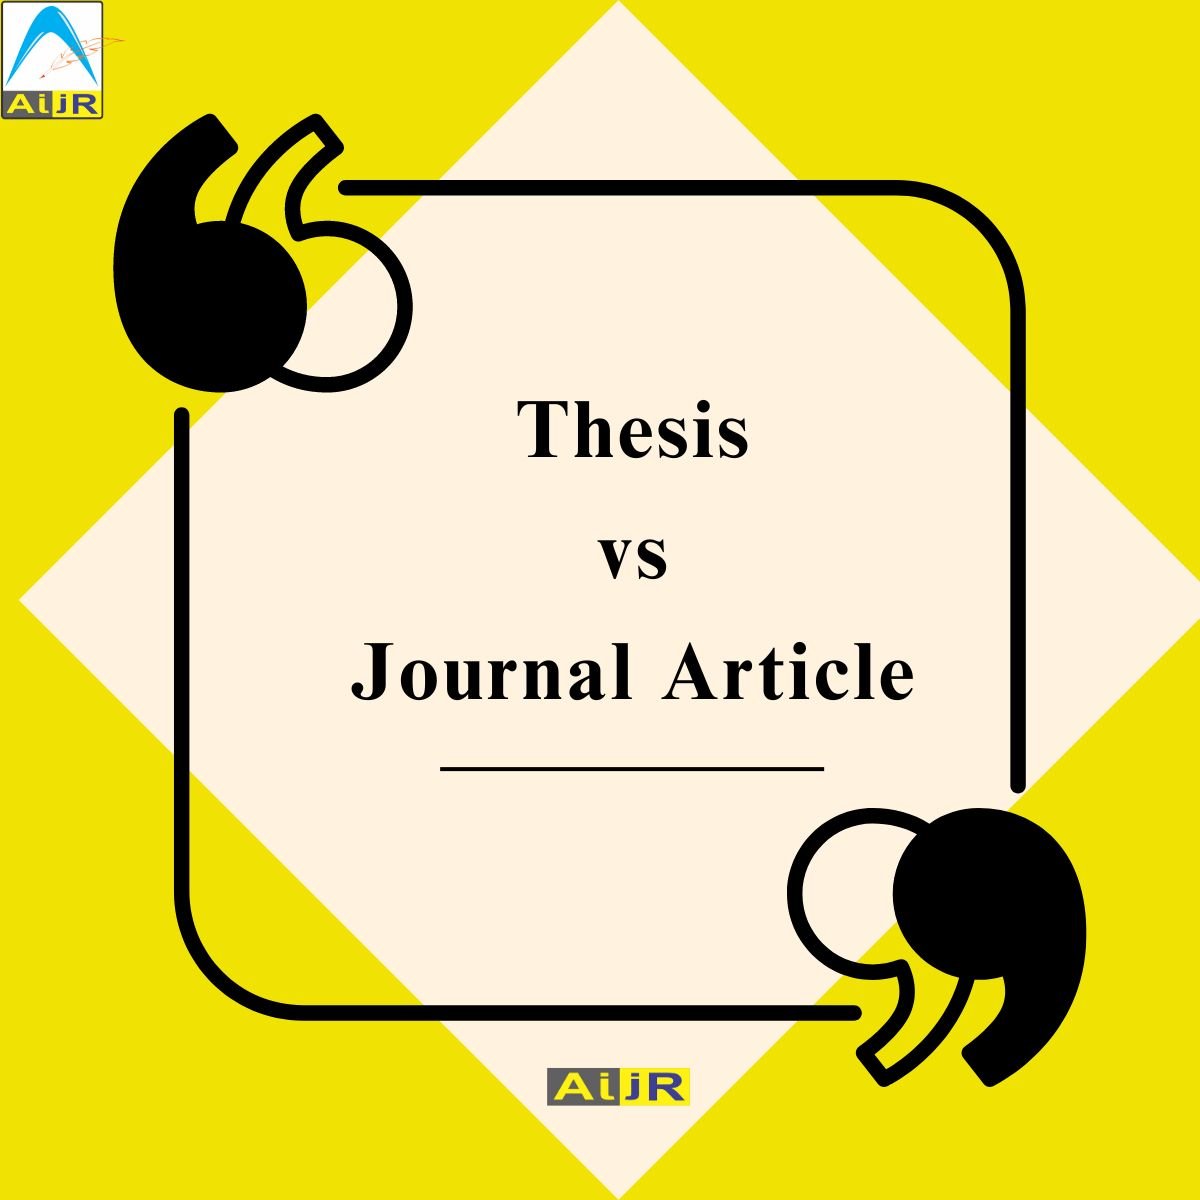 journal article in thesis